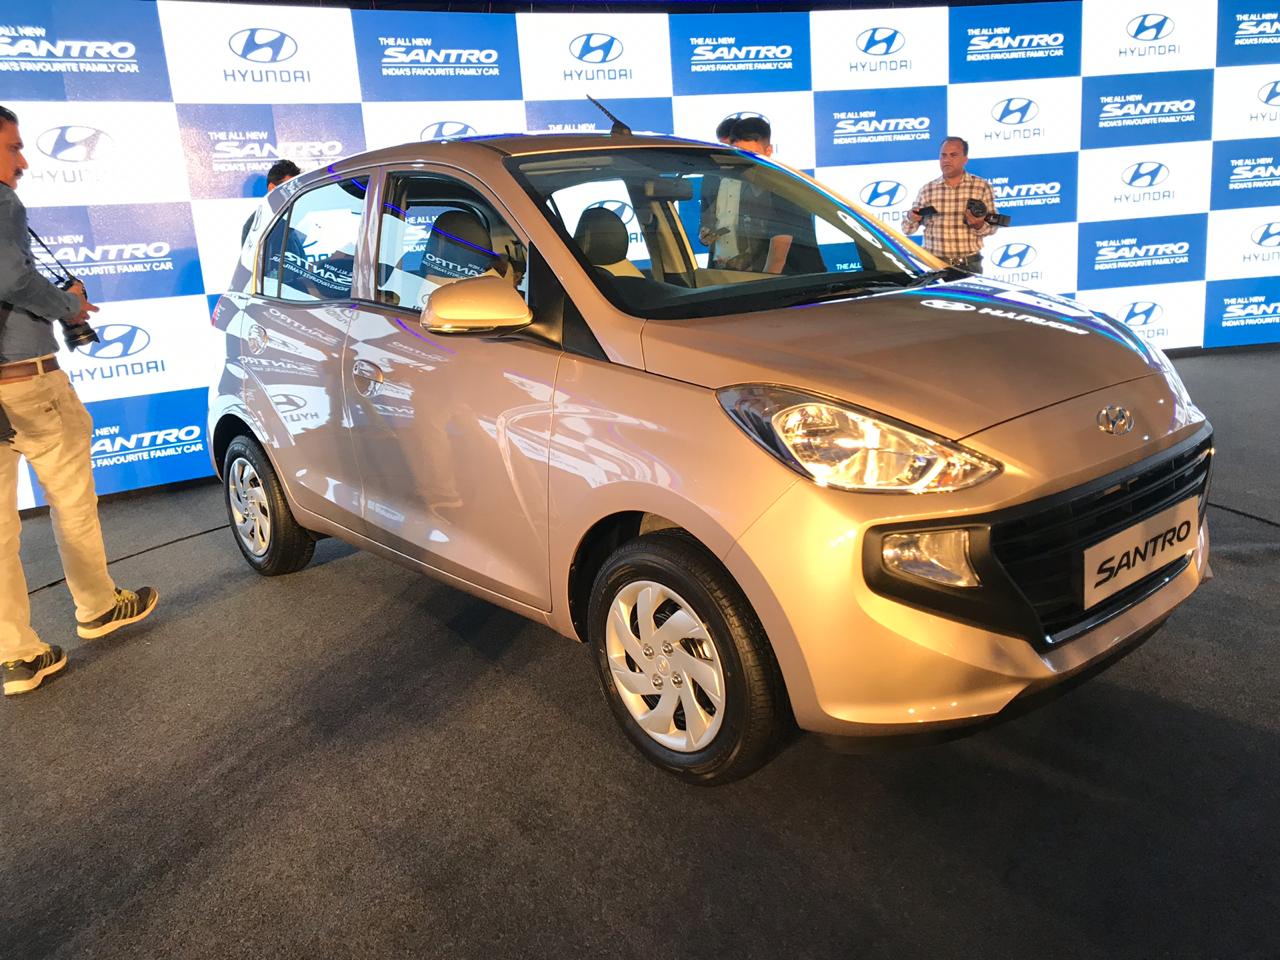 <p><a href="http://overdrive.in/news/2018-hyundai-santro-launched-in-india-at-rs-3-90-lakh/">Read our launch article for the new Hyundai Santro&nbsp;here</a></p>